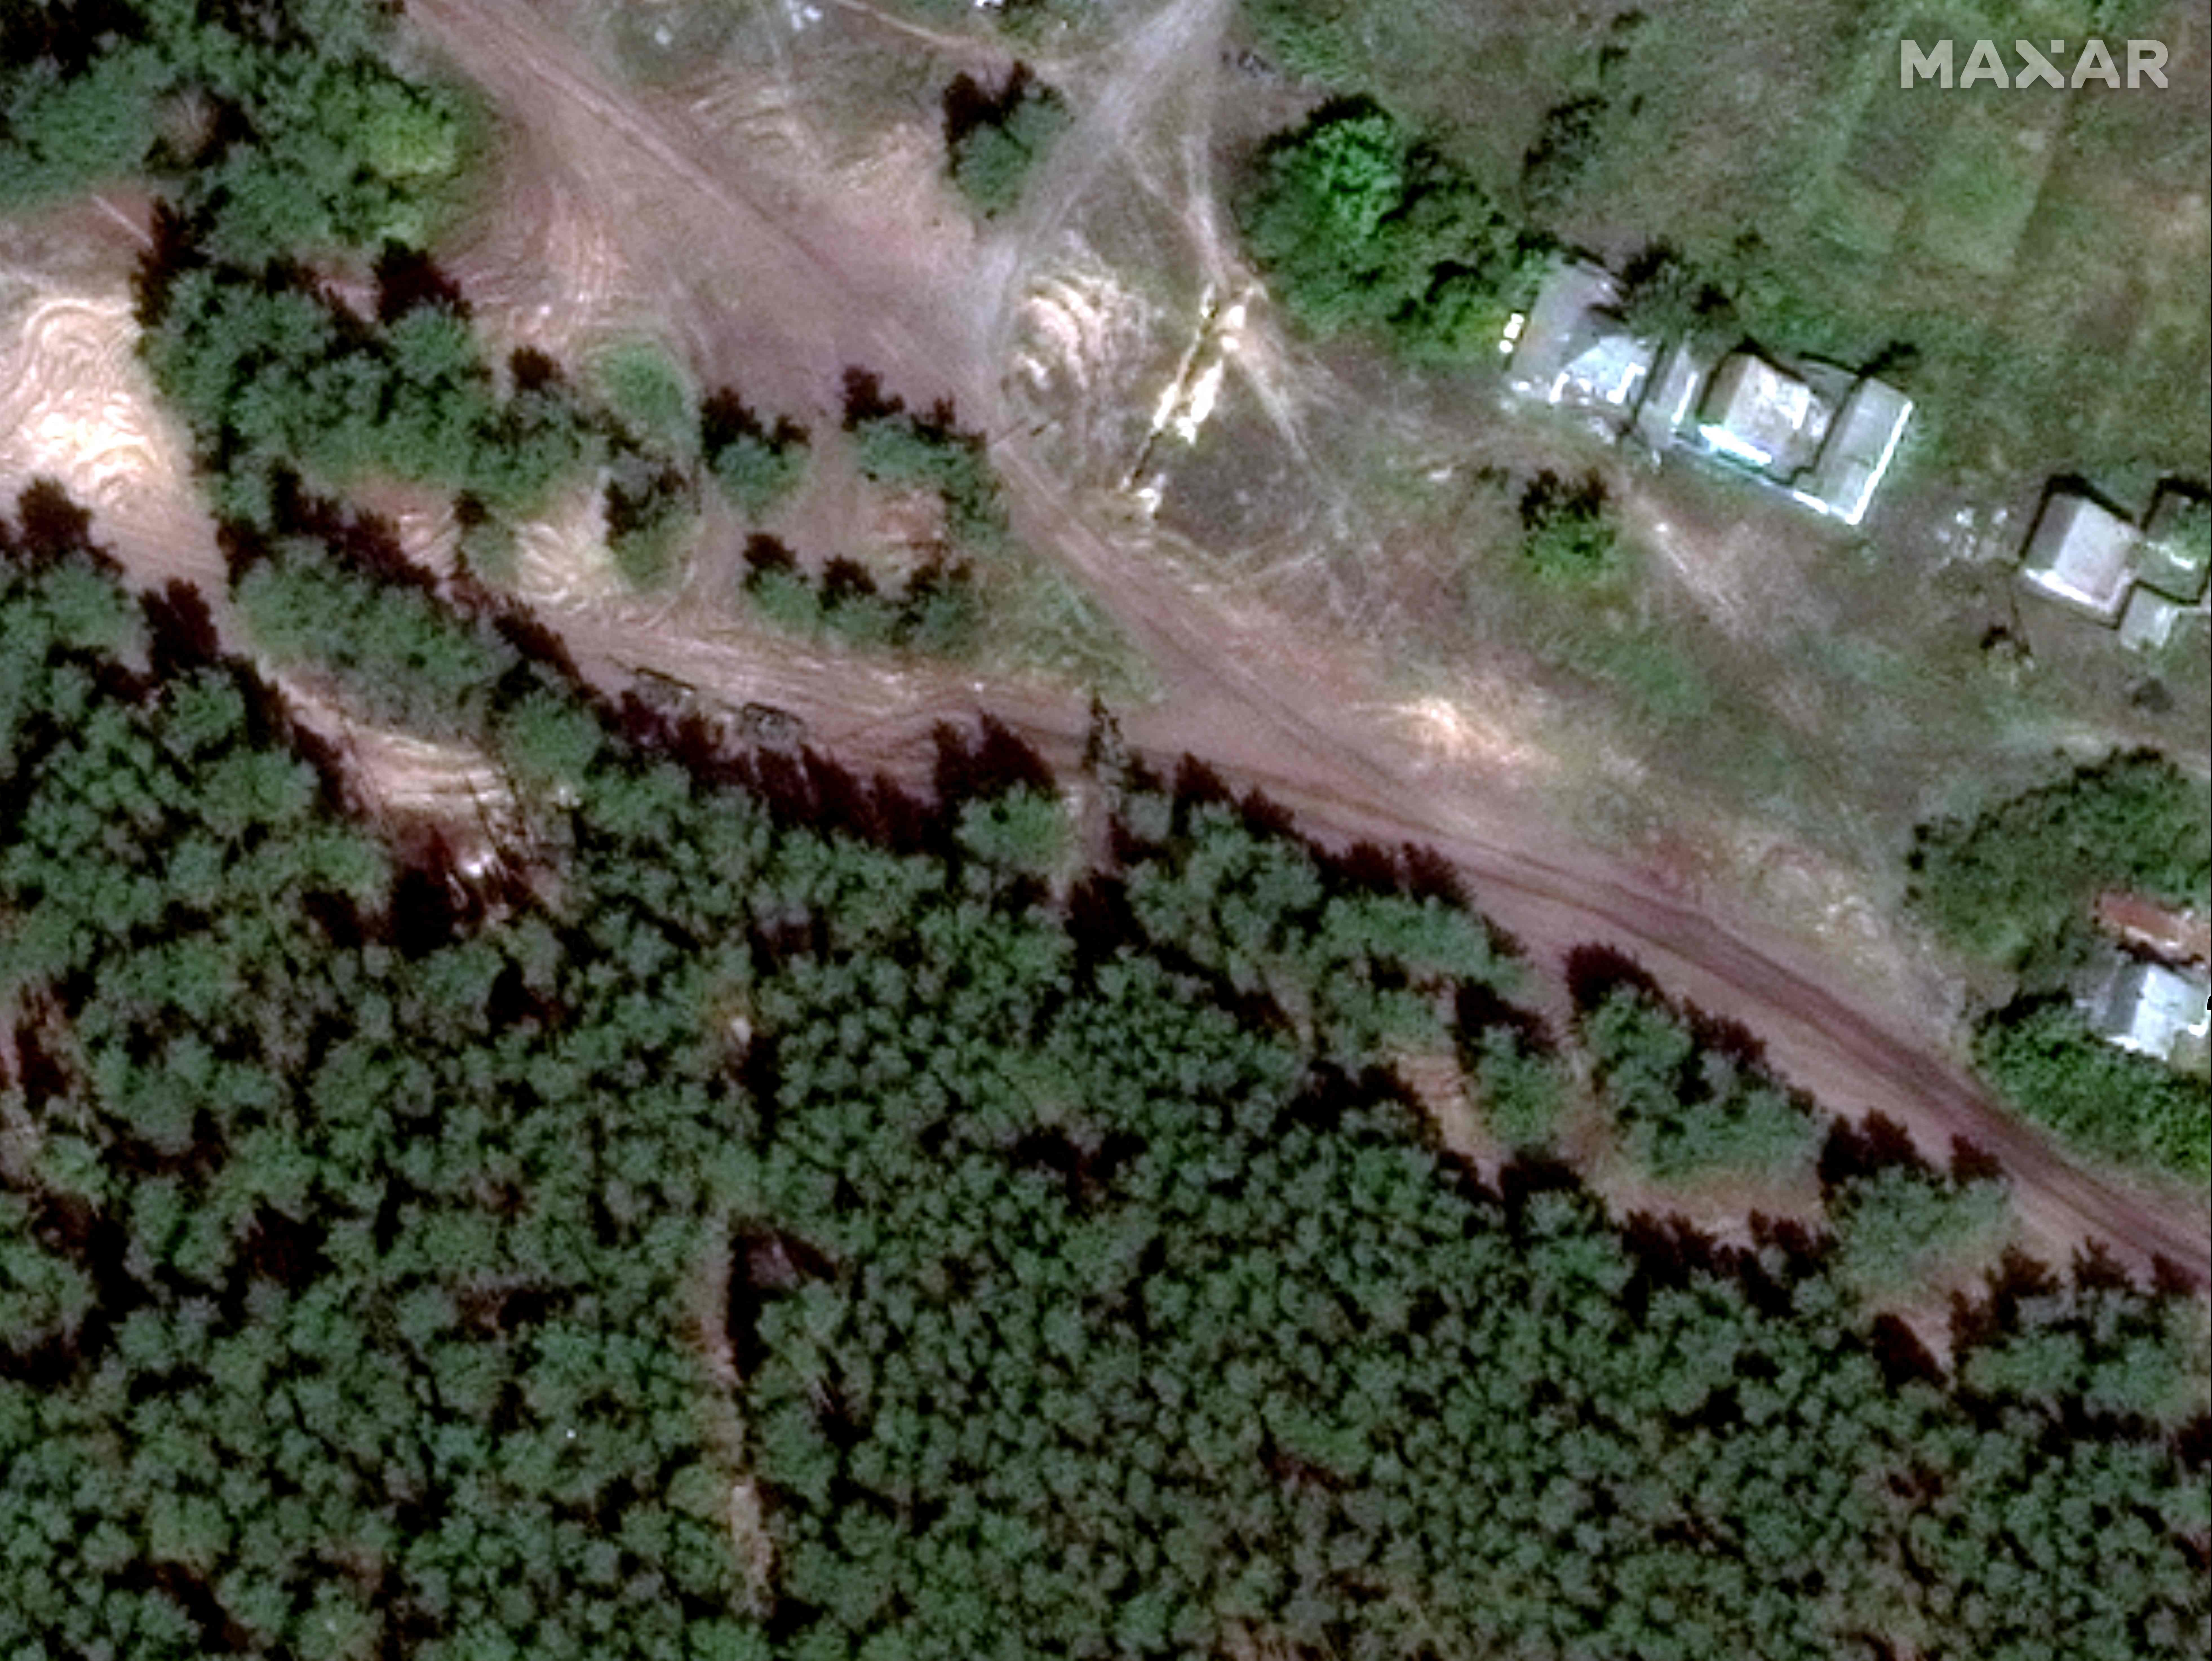 Satellite images appear to show tanks near the site of a mass grave in Ukrainian months before its discovery